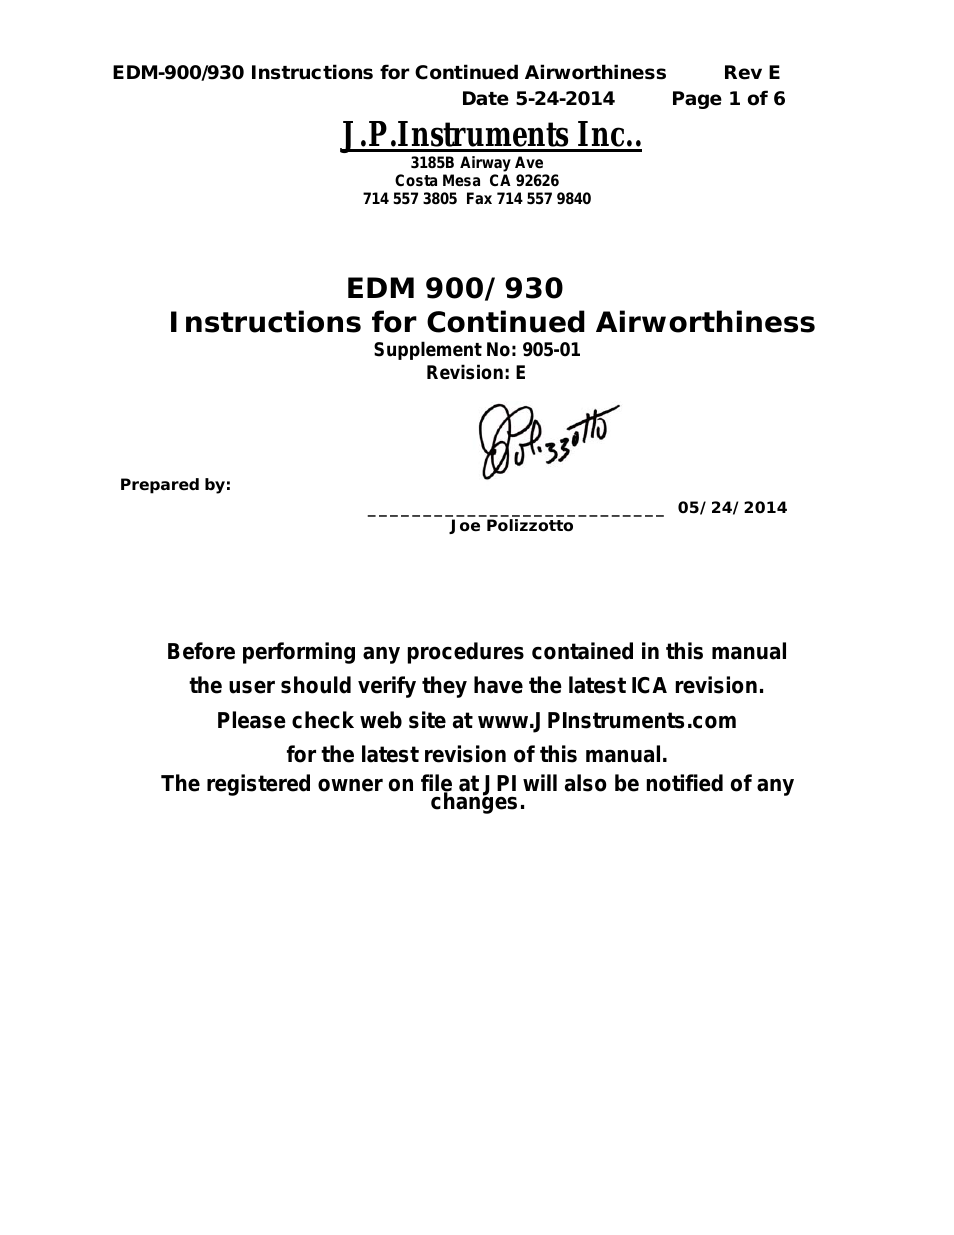 EDM 930 Primary Instructions for Continued Airworthiness